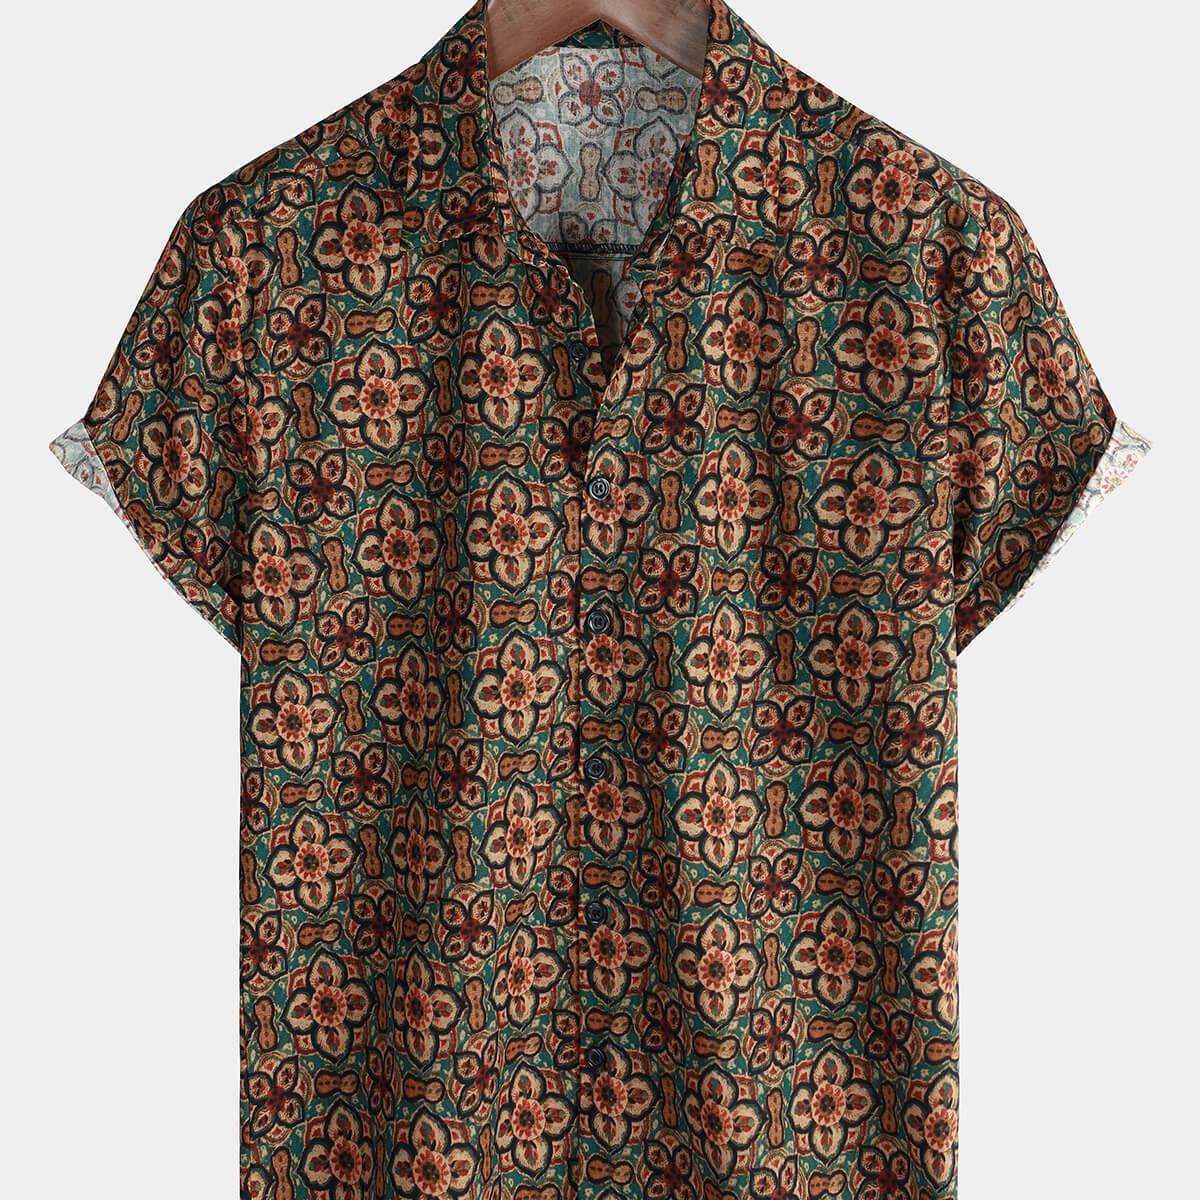 Men's Vintage Holiday Brown Floral Button Up Retro Short Sleeve Shirt